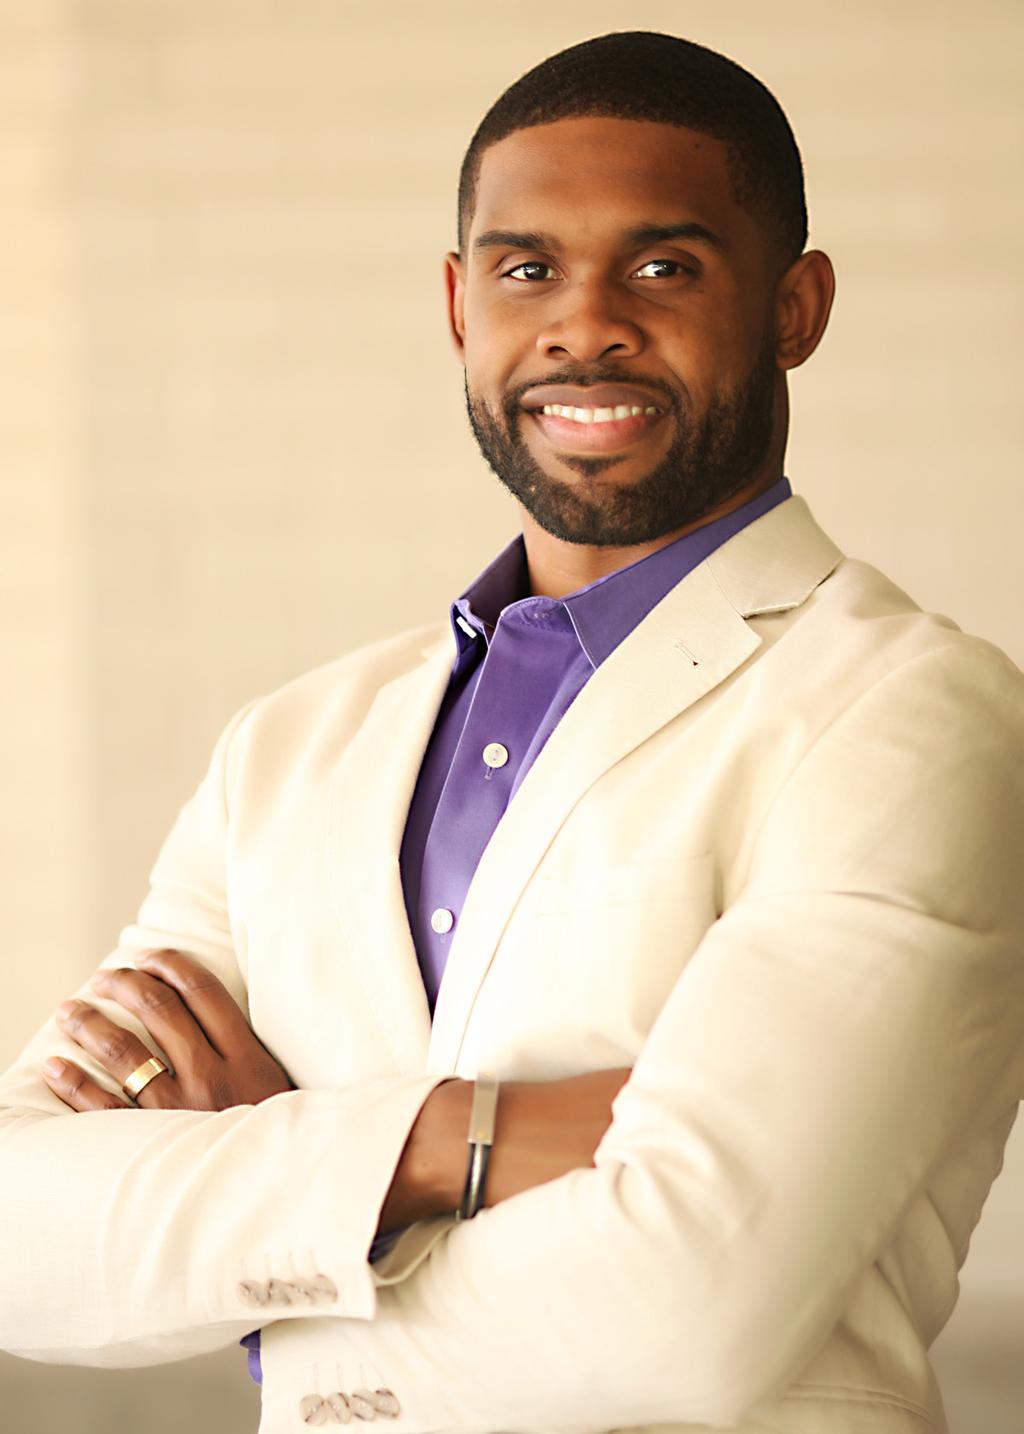 Marvin Walker After being led by the Lord to move to Dallas from Southern California in May of 2014, Marvin has been a Texas resident for three years as well as being married to his bride Amber for